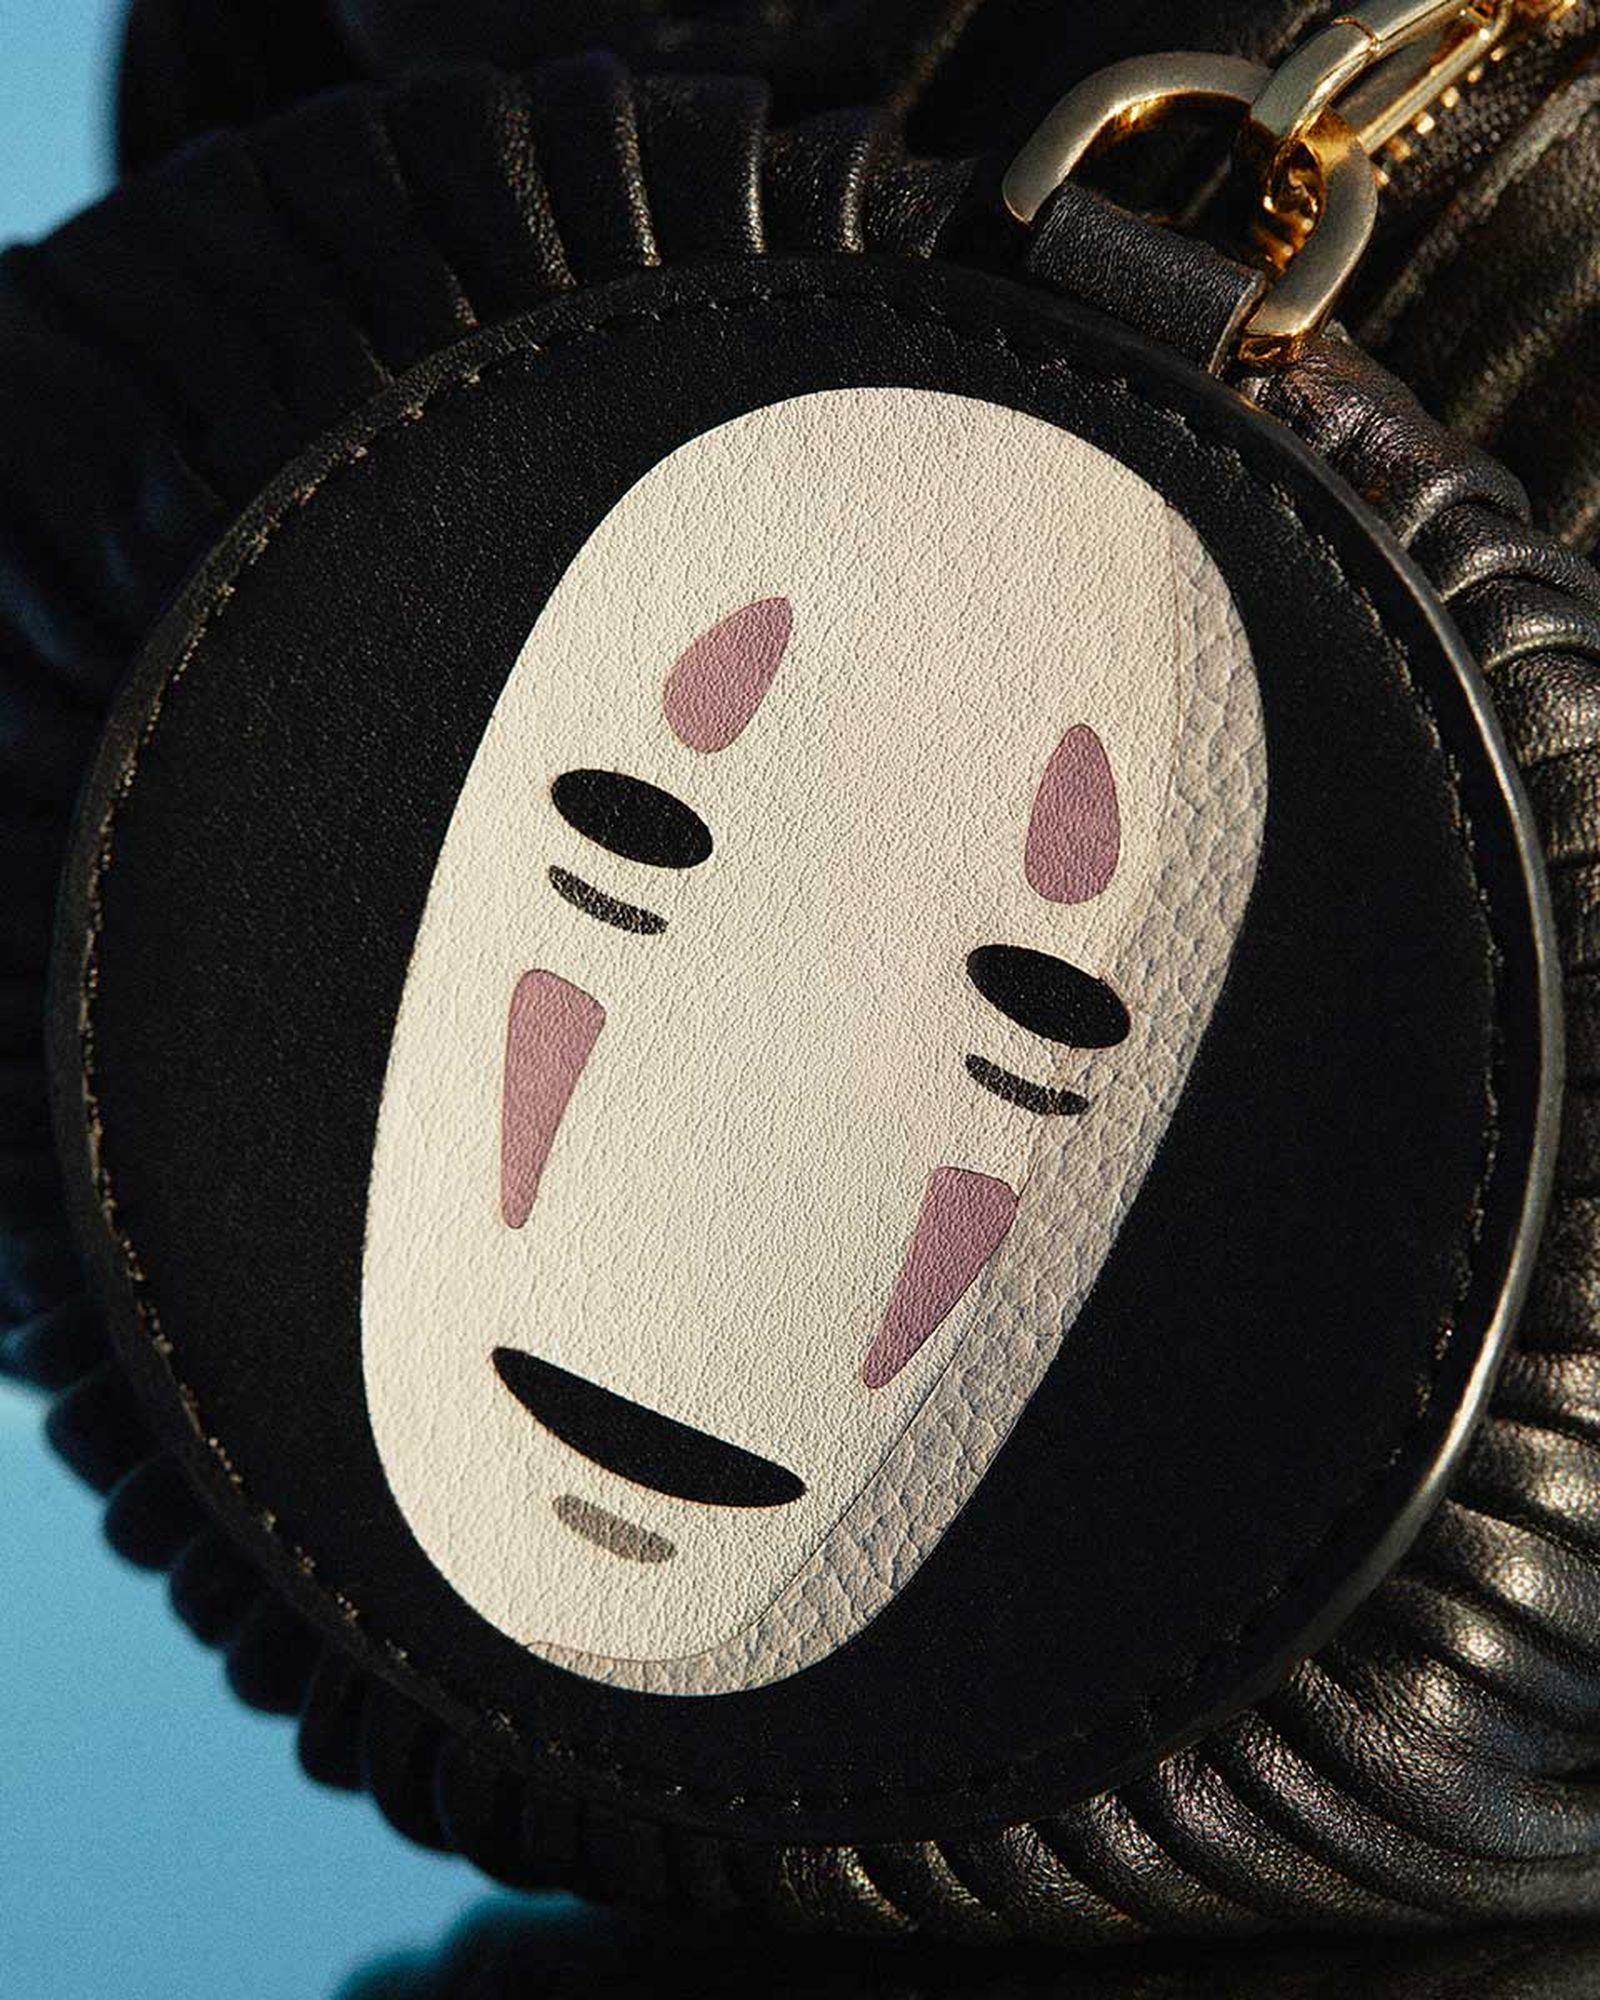 loewe spirited away studio ghibli collaboration collection jw anderson jonathon movie no face chihiro yubaba mouse rat bag release date info buy price 2022 january